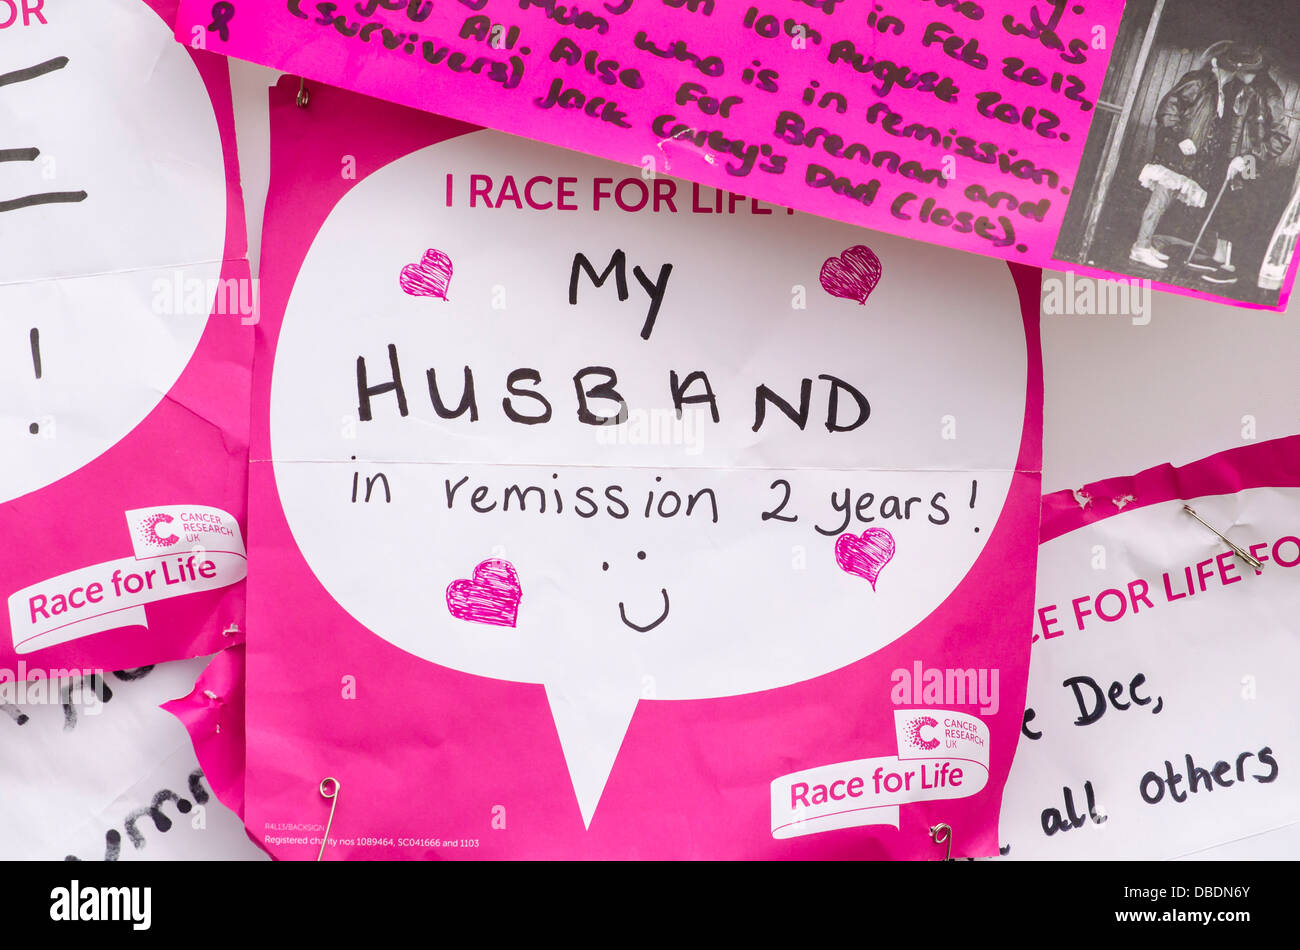 Race for life for her husband Stock Photo